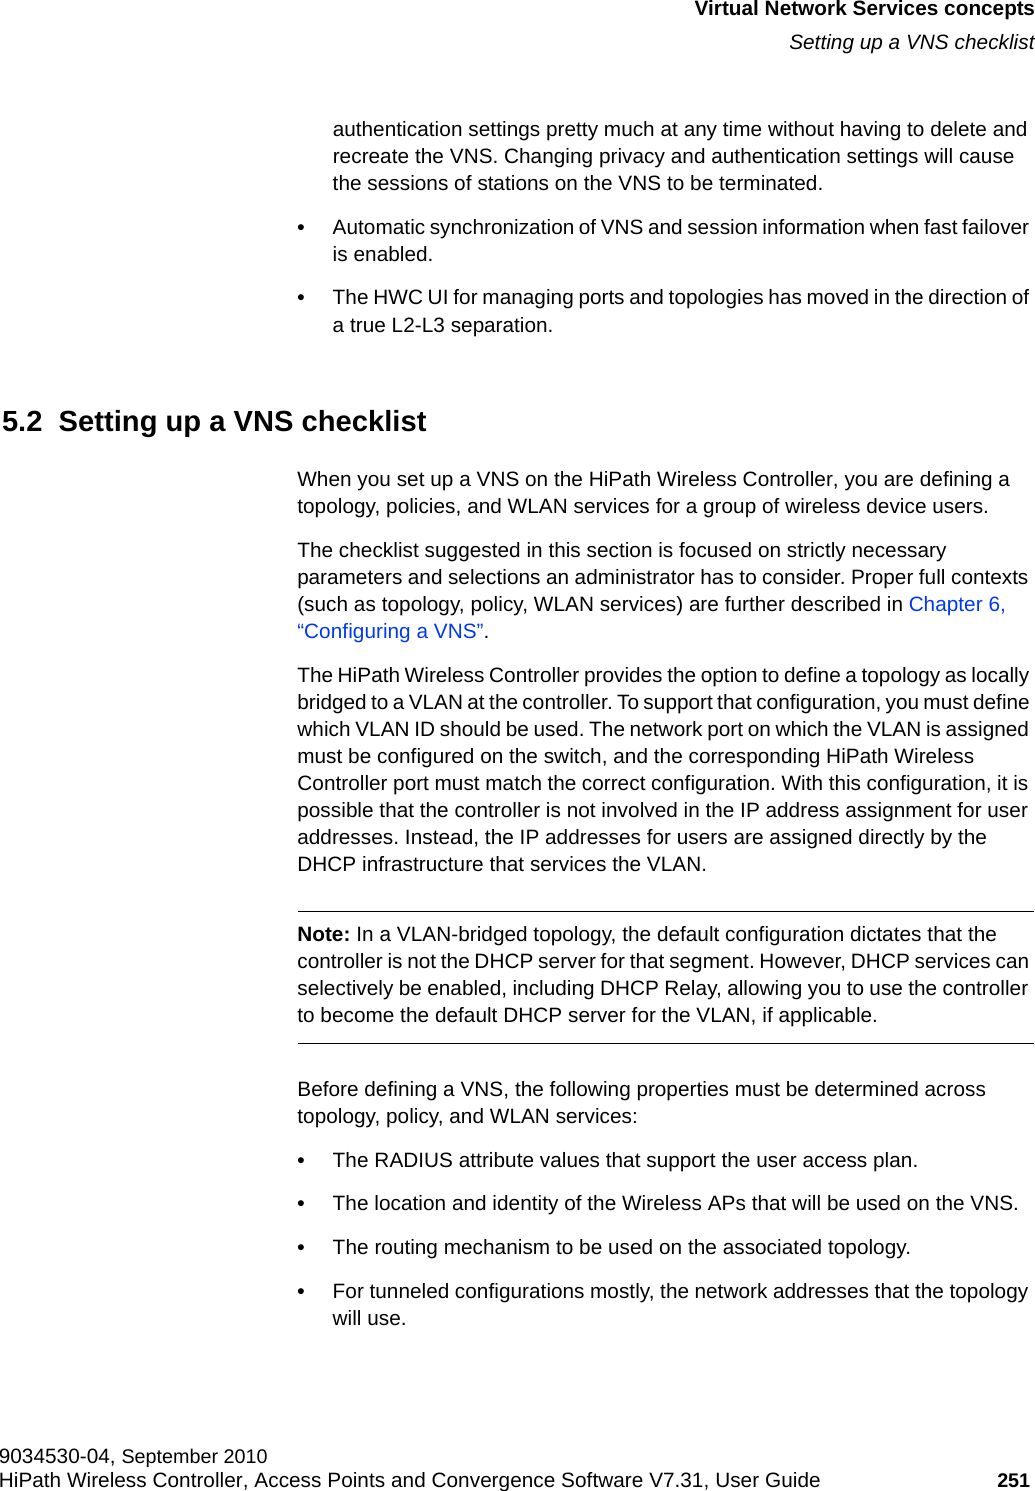 hwc_vnsintro.fmVirtual Network Services conceptsSetting up a VNS checklist9034530-04, September 2010HiPath Wireless Controller, Access Points and Convergence Software V7.31, User Guide 251         authentication settings pretty much at any time without having to delete and recreate the VNS. Changing privacy and authentication settings will cause the sessions of stations on the VNS to be terminated.•Automatic synchronization of VNS and session information when fast failover is enabled.•The HWC UI for managing ports and topologies has moved in the direction of a true L2-L3 separation. 5.2  Setting up a VNS checklistWhen you set up a VNS on the HiPath Wireless Controller, you are defining a topology, policies, and WLAN services for a group of wireless device users. The checklist suggested in this section is focused on strictly necessary parameters and selections an administrator has to consider. Proper full contexts (such as topology, policy, WLAN services) are further described in Chapter 6, “Configuring a VNS”.The HiPath Wireless Controller provides the option to define a topology as locally bridged to a VLAN at the controller. To support that configuration, you must define which VLAN ID should be used. The network port on which the VLAN is assigned must be configured on the switch, and the corresponding HiPath Wireless Controller port must match the correct configuration. With this configuration, it is possible that the controller is not involved in the IP address assignment for user addresses. Instead, the IP addresses for users are assigned directly by the DHCP infrastructure that services the VLAN.Note: In a VLAN-bridged topology, the default configuration dictates that the controller is not the DHCP server for that segment. However, DHCP services can selectively be enabled, including DHCP Relay, allowing you to use the controller to become the default DHCP server for the VLAN, if applicable.Before defining a VNS, the following properties must be determined across topology, policy, and WLAN services:•The RADIUS attribute values that support the user access plan.•The location and identity of the Wireless APs that will be used on the VNS.•The routing mechanism to be used on the associated topology.•For tunneled configurations mostly, the network addresses that the topology will use.